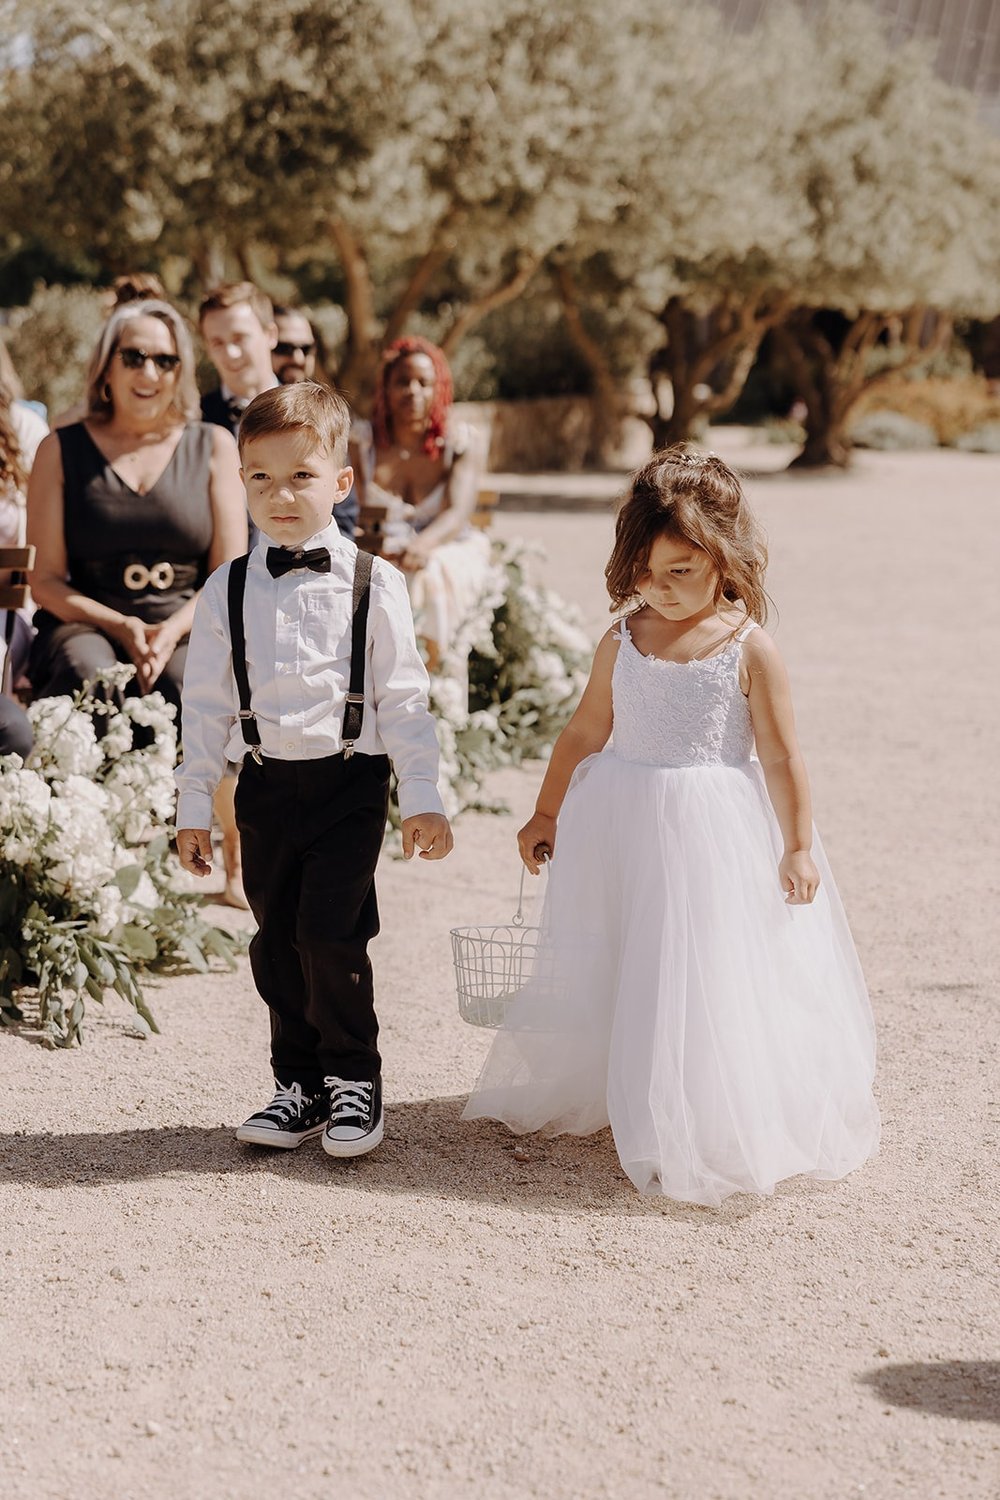 Flower girl and boy walk down the wedding aisle at Tuscan-style wedding in California